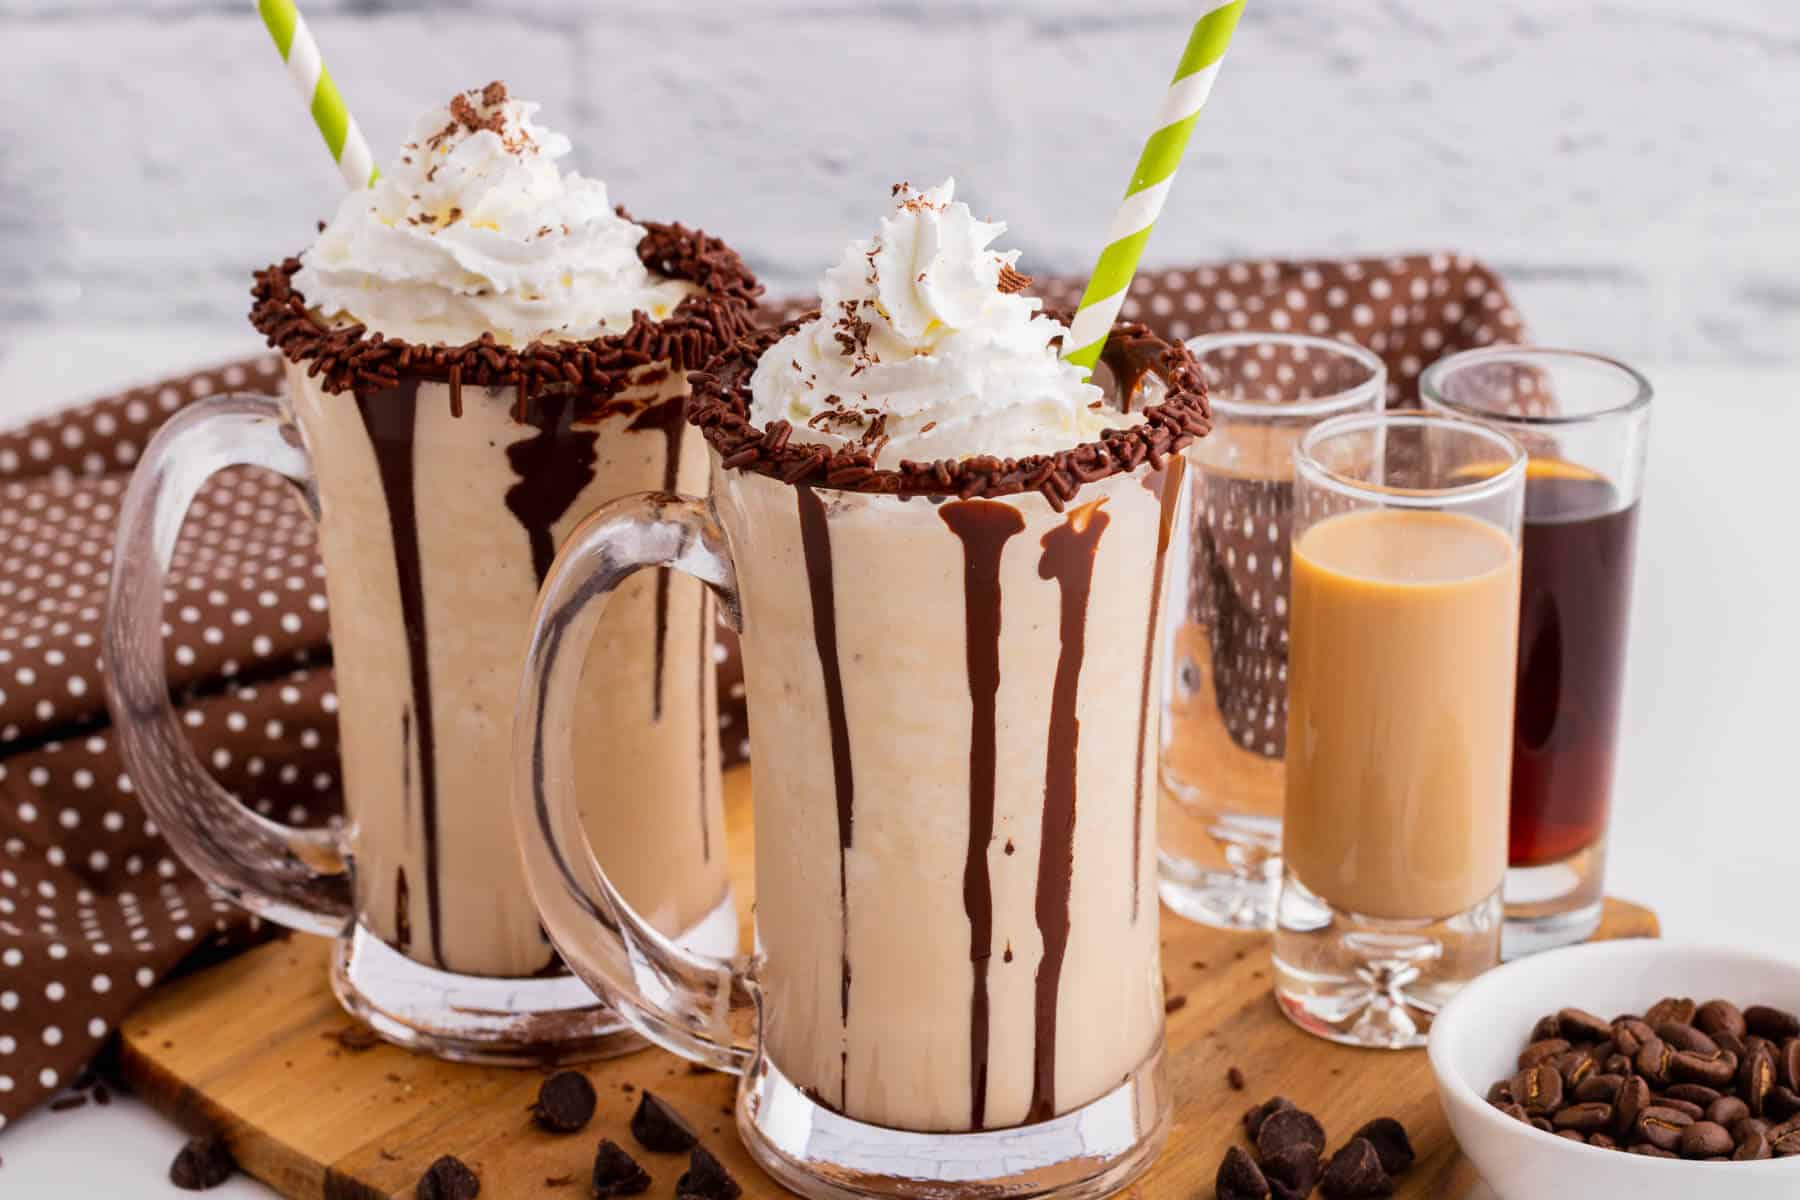 Two chocolate rimmed glass mugs containing frozen mudslide, whipped cream, and chocolate sauce.